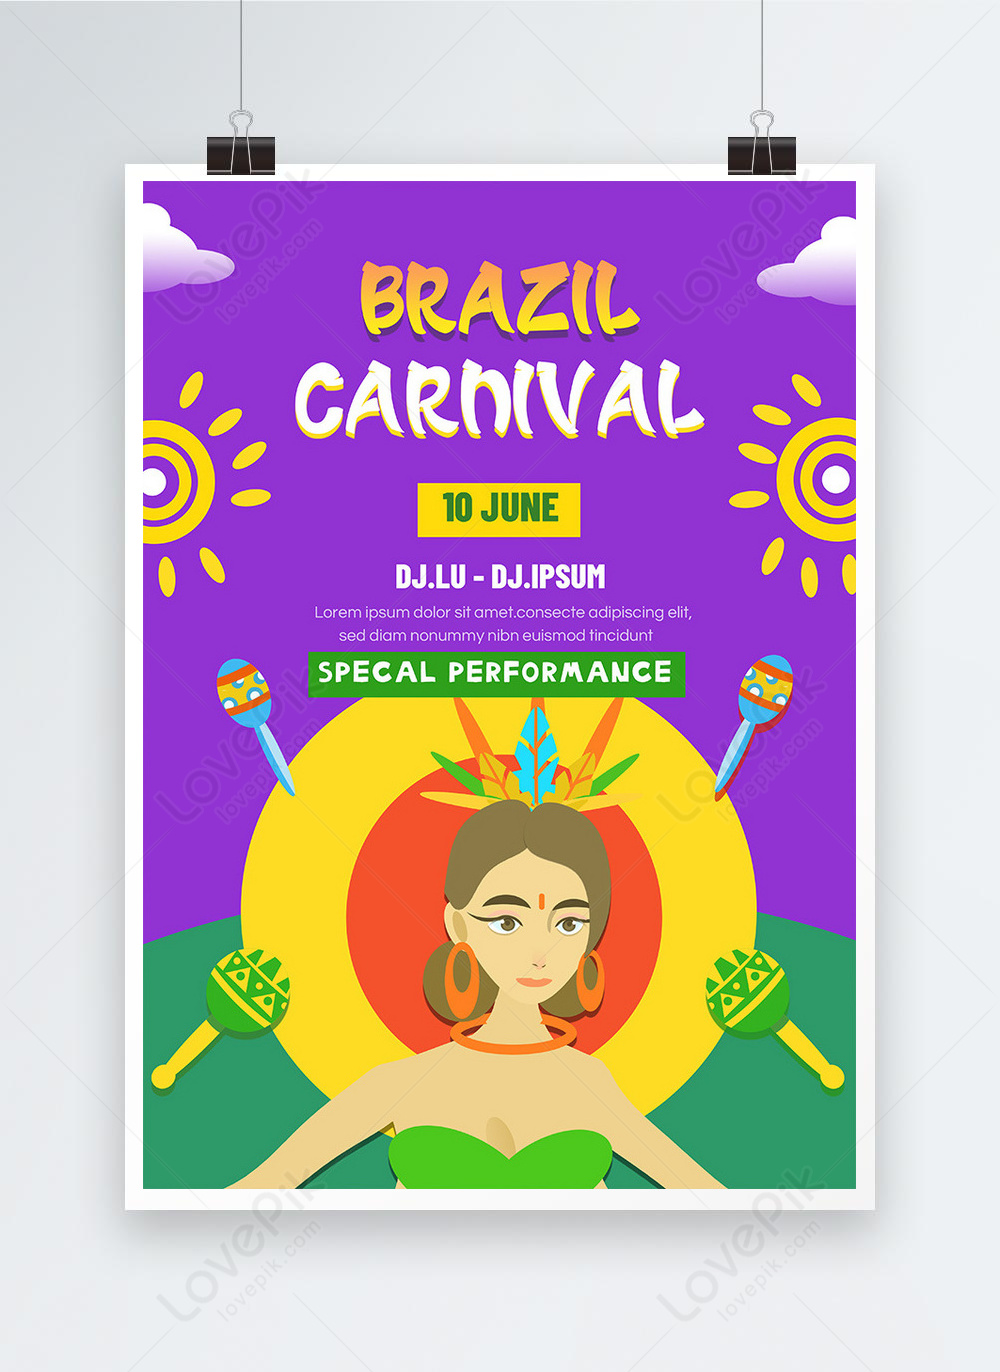 carnival-girl-at-the-brazilian-carnival-template-image-picture-free